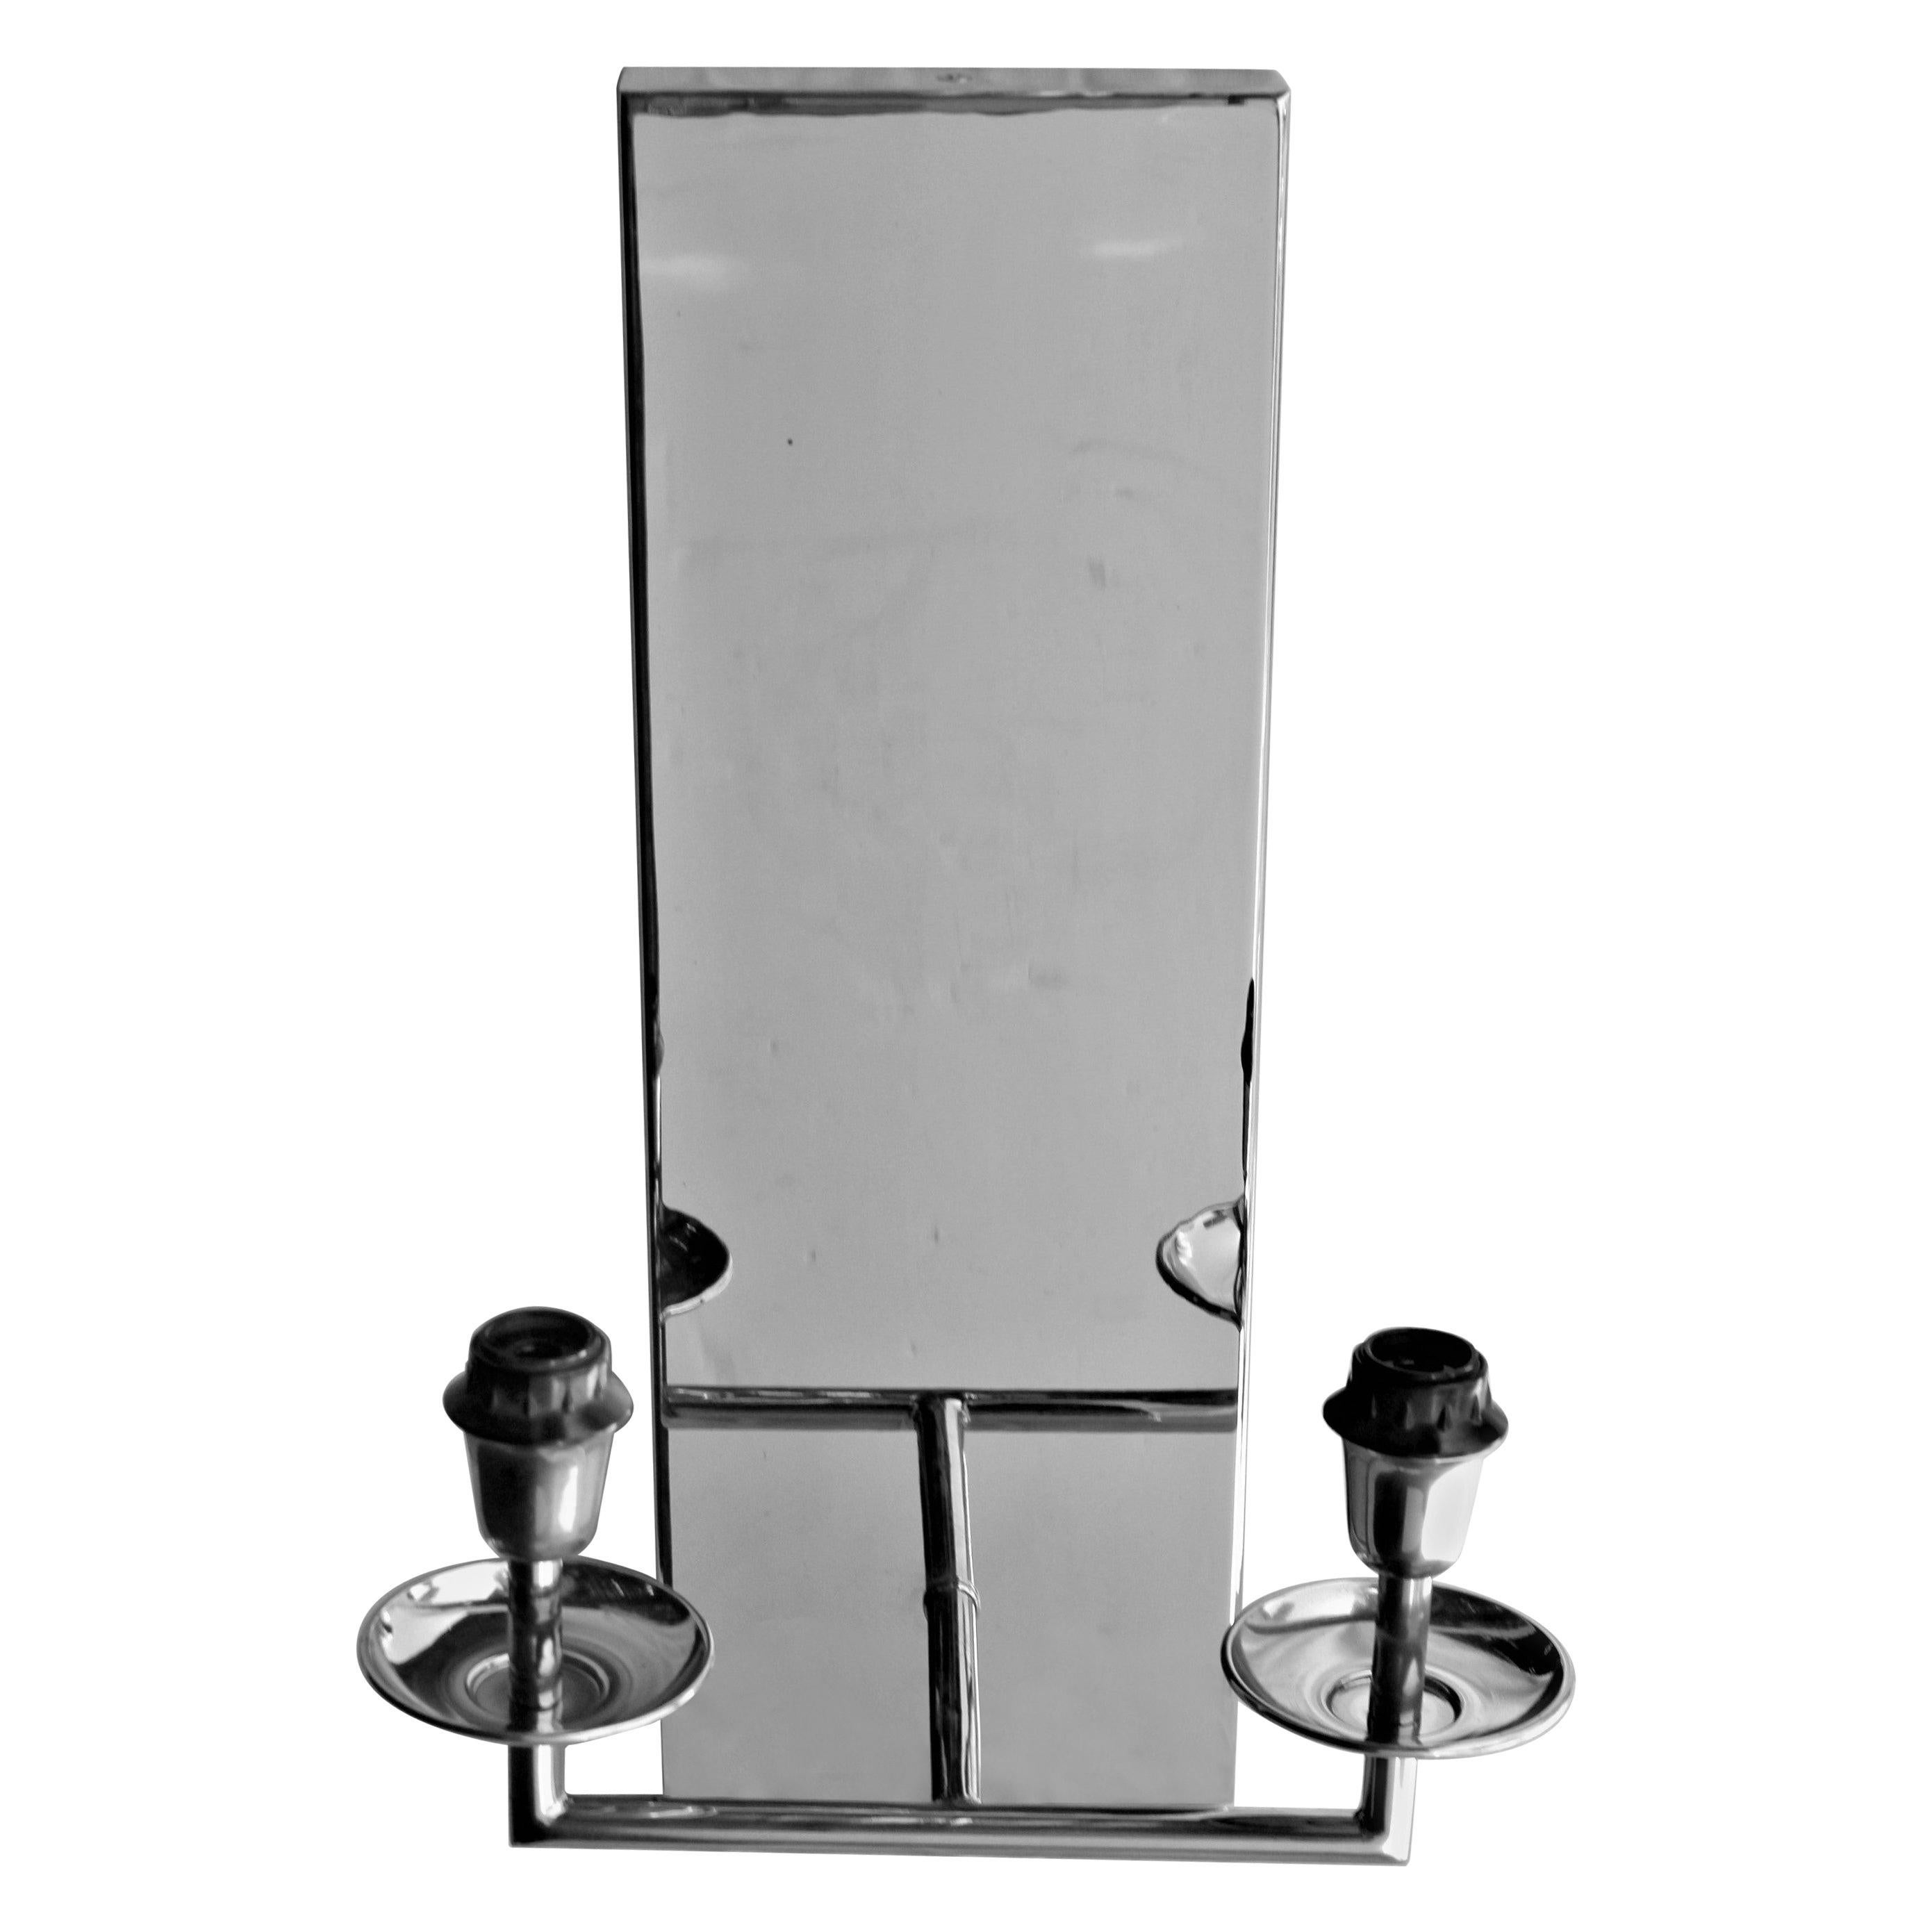 Art Deco/Modern Sconce '1' Hi Polished Nickel Finish Two Light Zia Priven For Sale